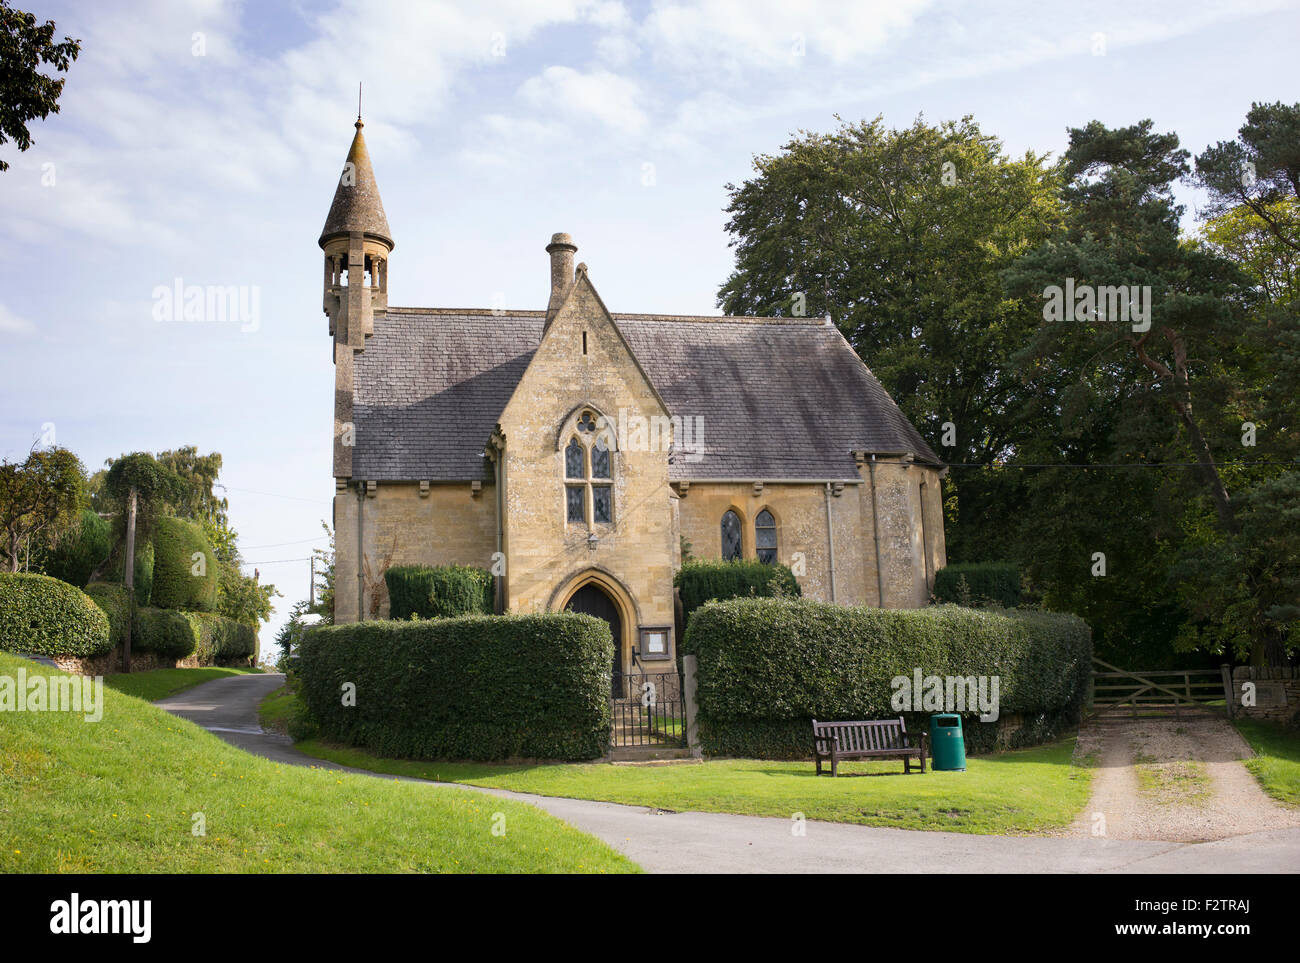 St Michael & All Angels, Broad Campden, Gloucestershire, Cotswolds, England Stock Photo